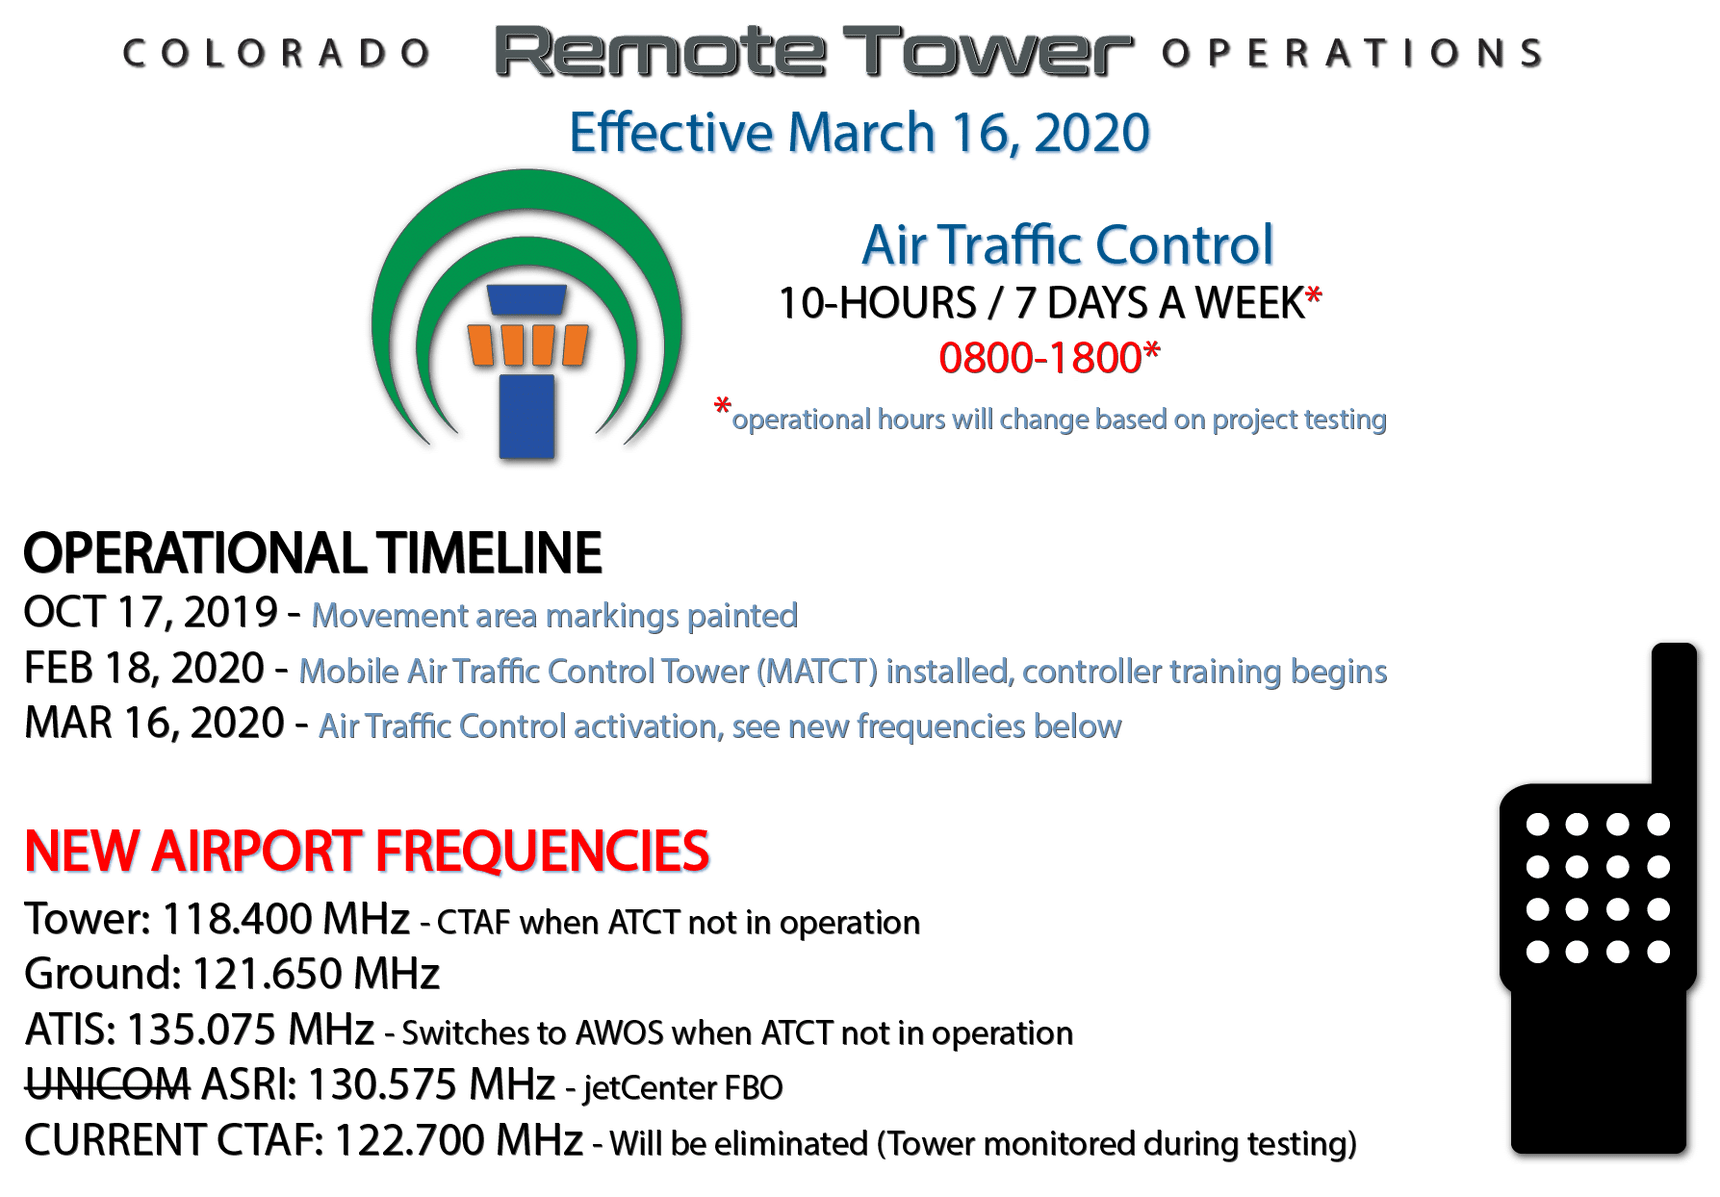 Remote Tower Operations Information detail image